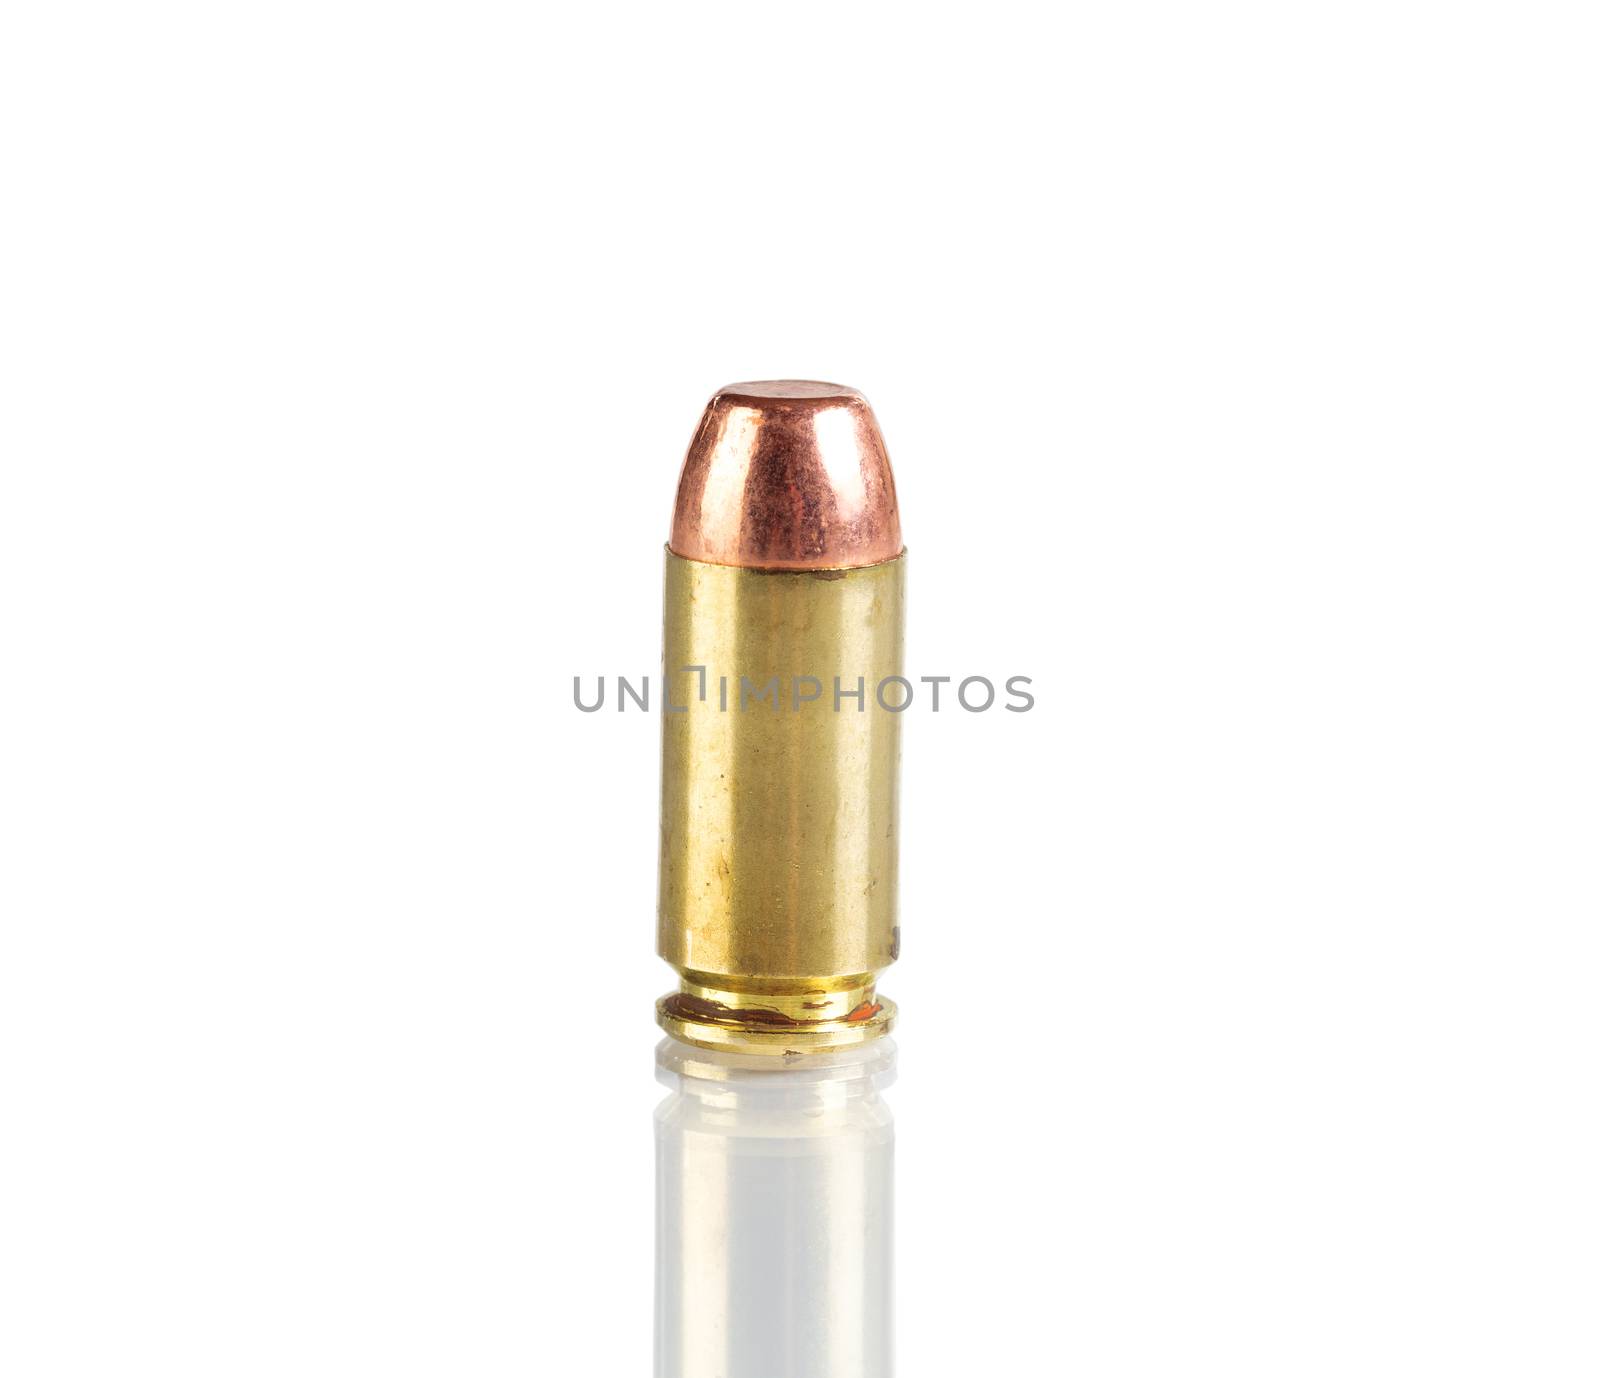 Single bullet isolated on a white background  by tab1962